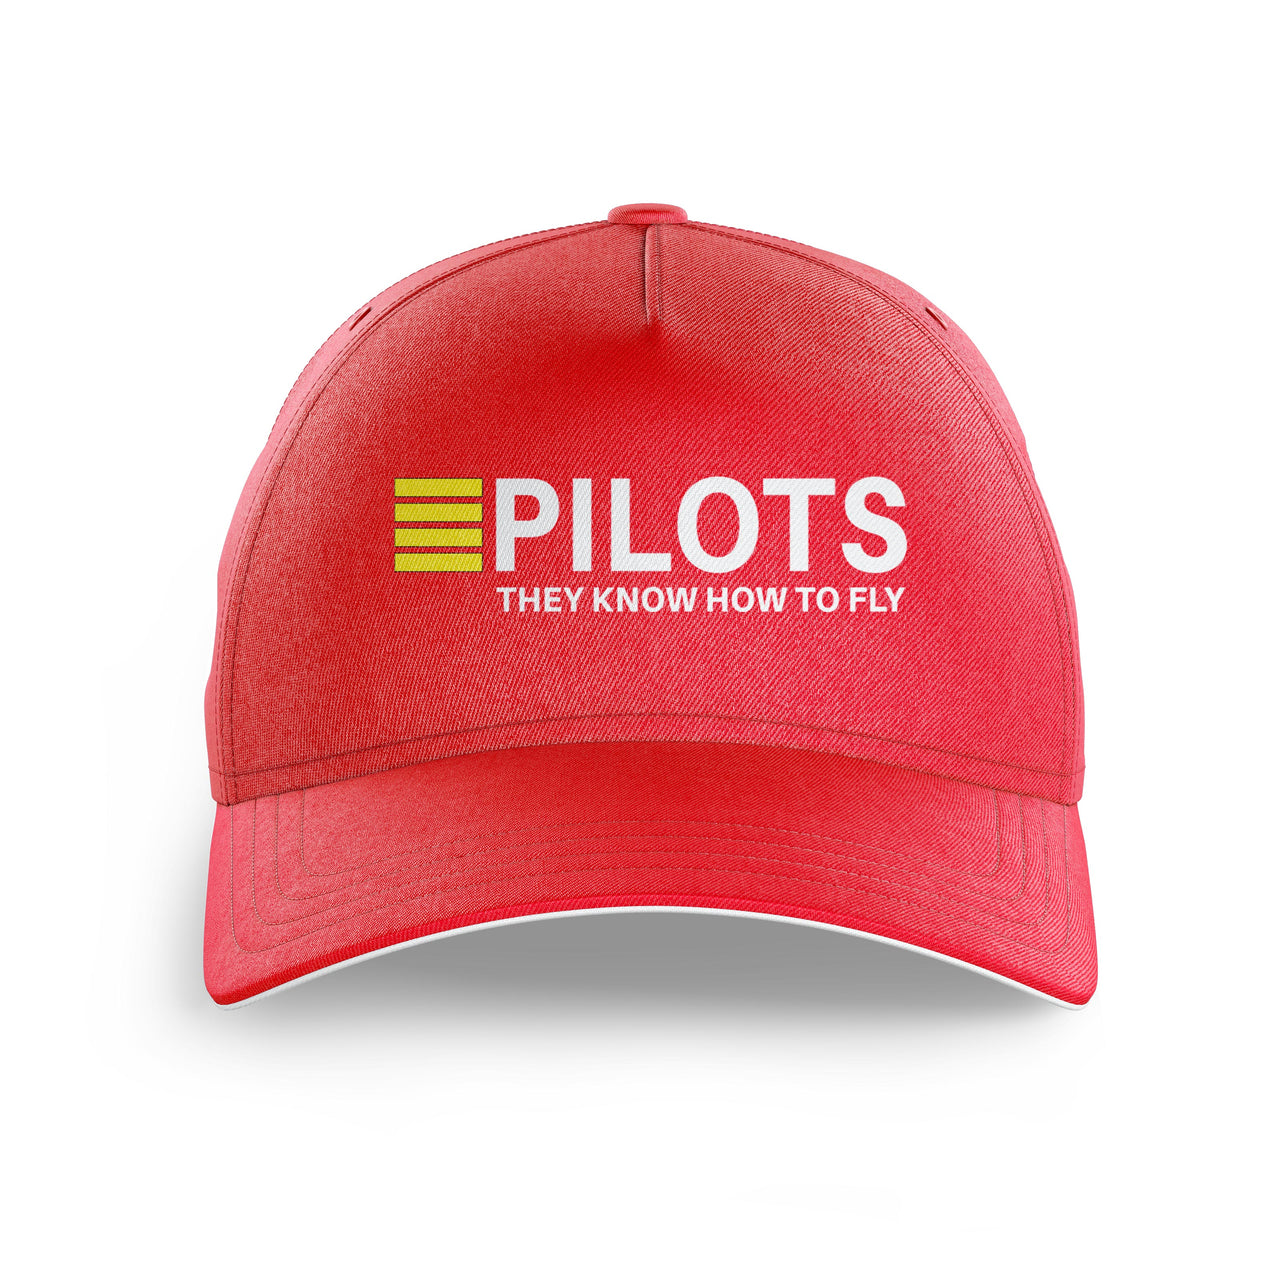 Pilots They Know How To Fly Printed Hats